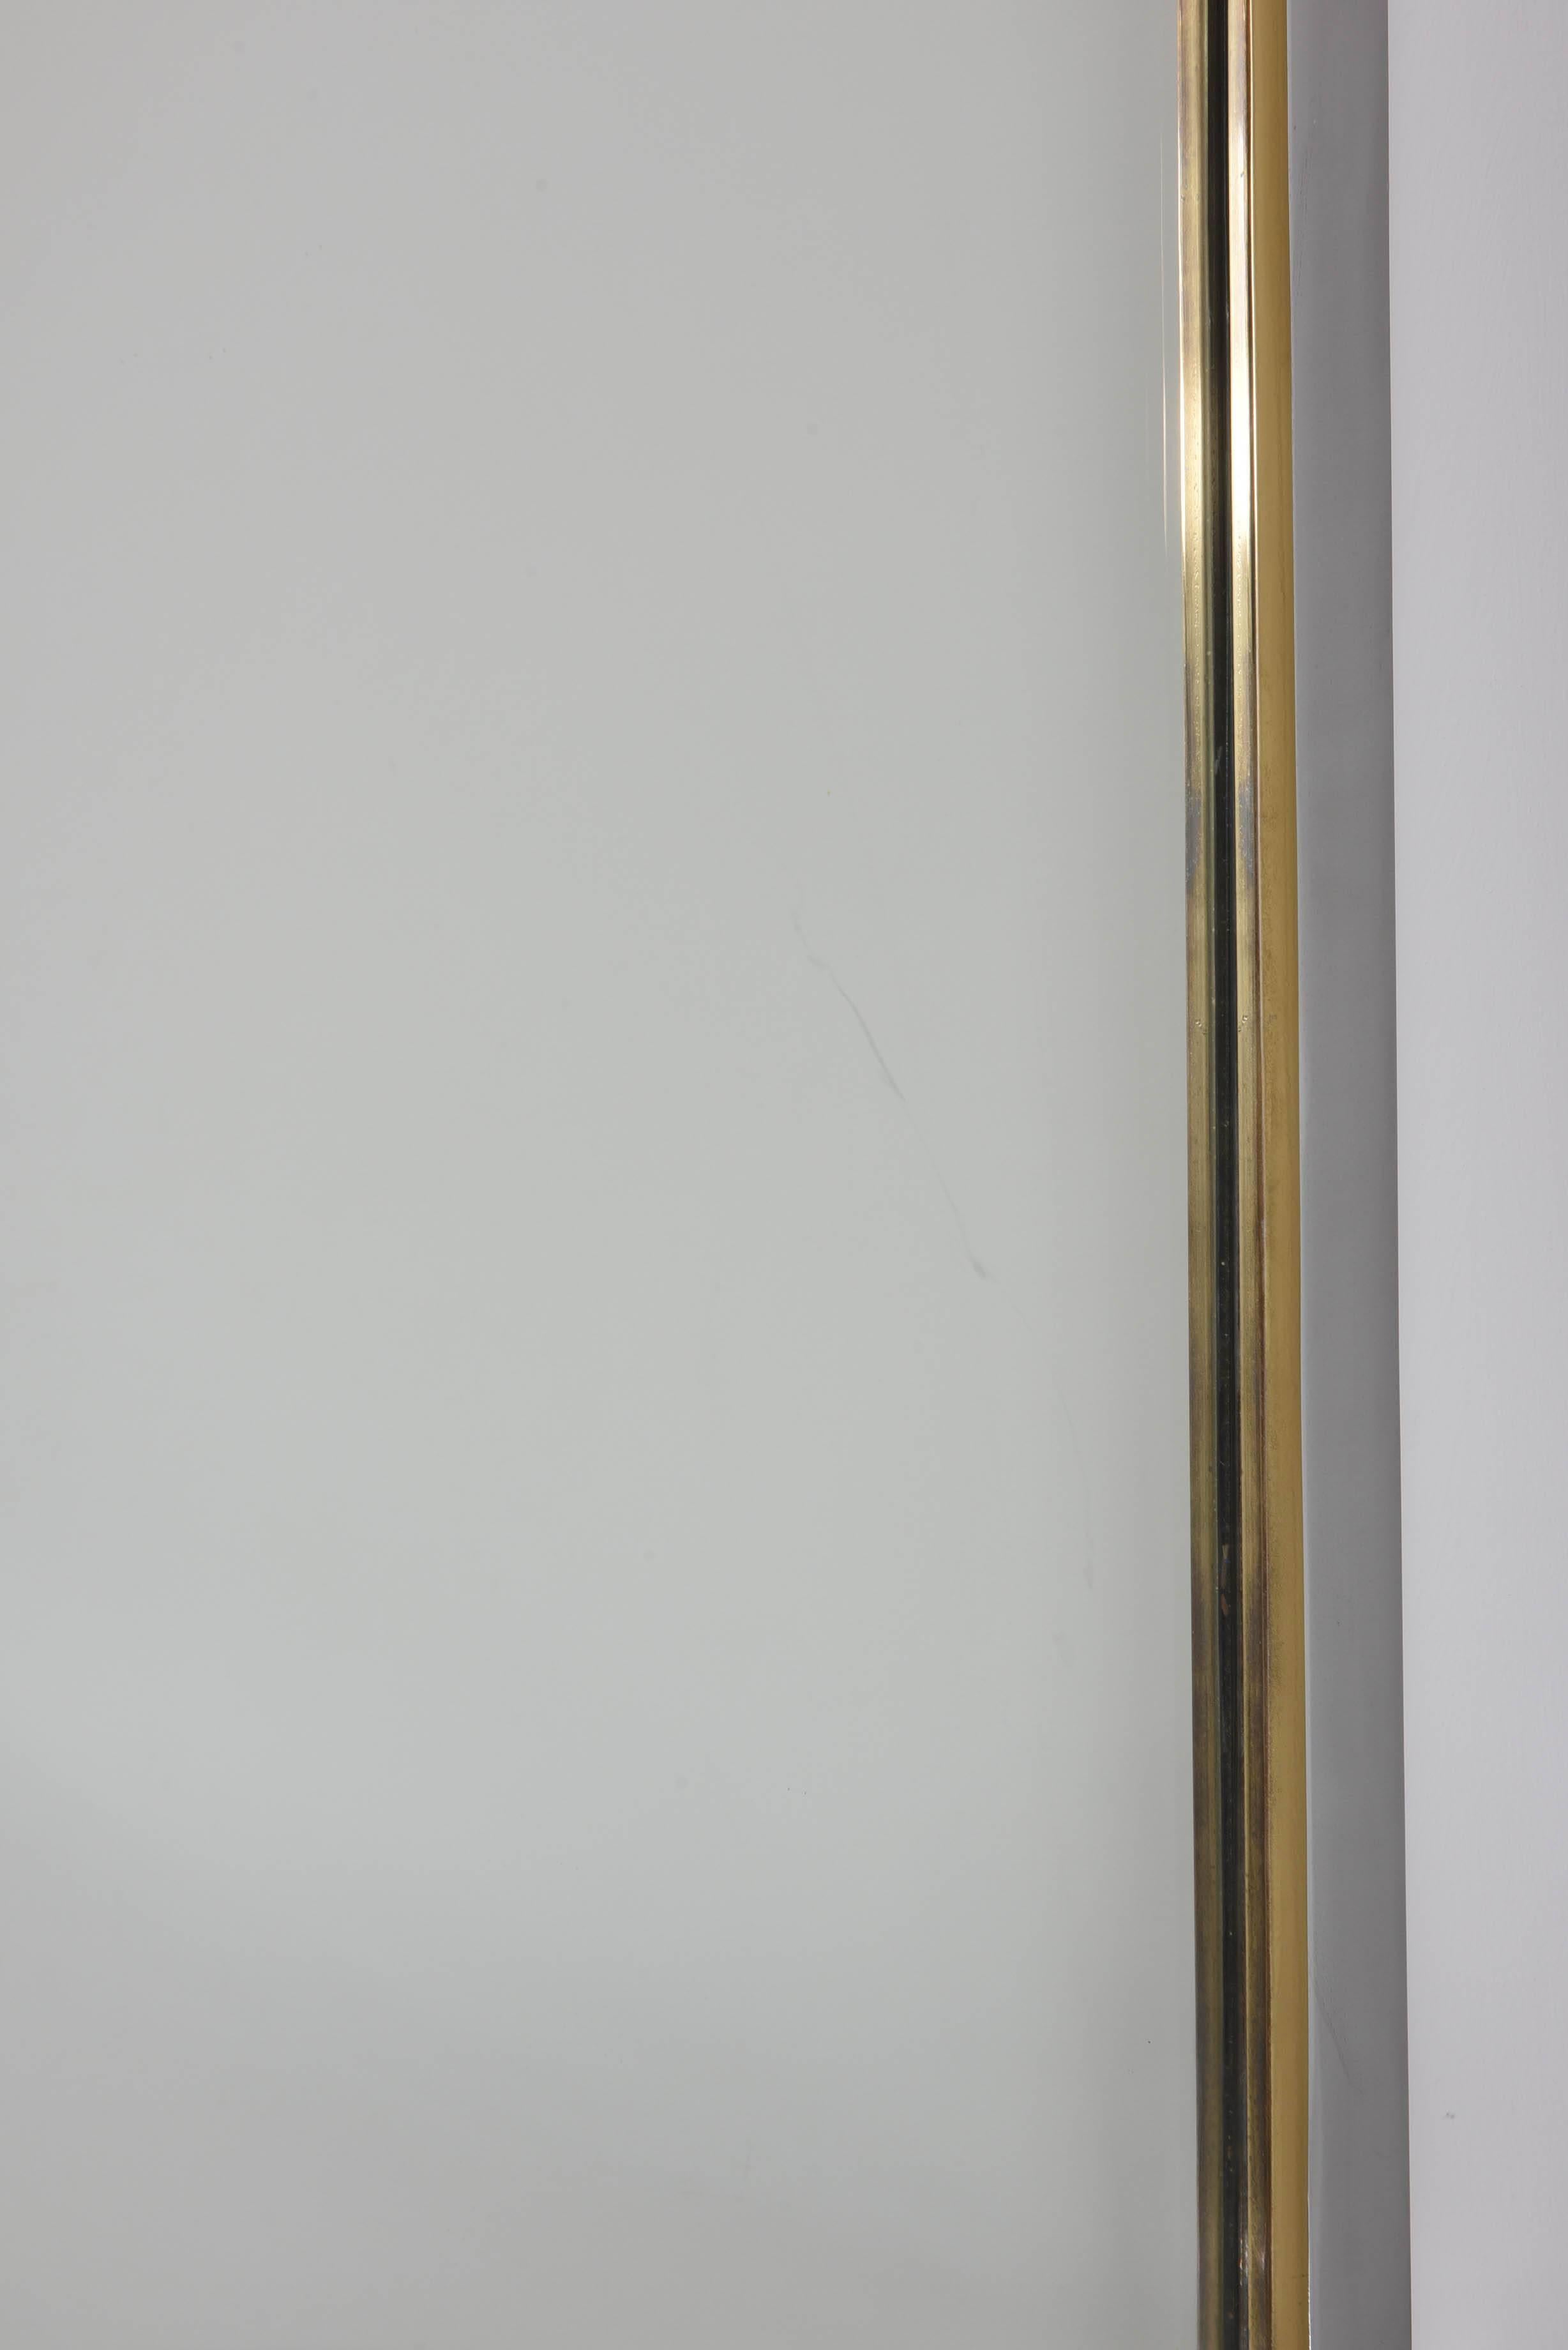 American Midcentury Chrome Wall-Hung Mirror with Shelf, for DIA, 1970s